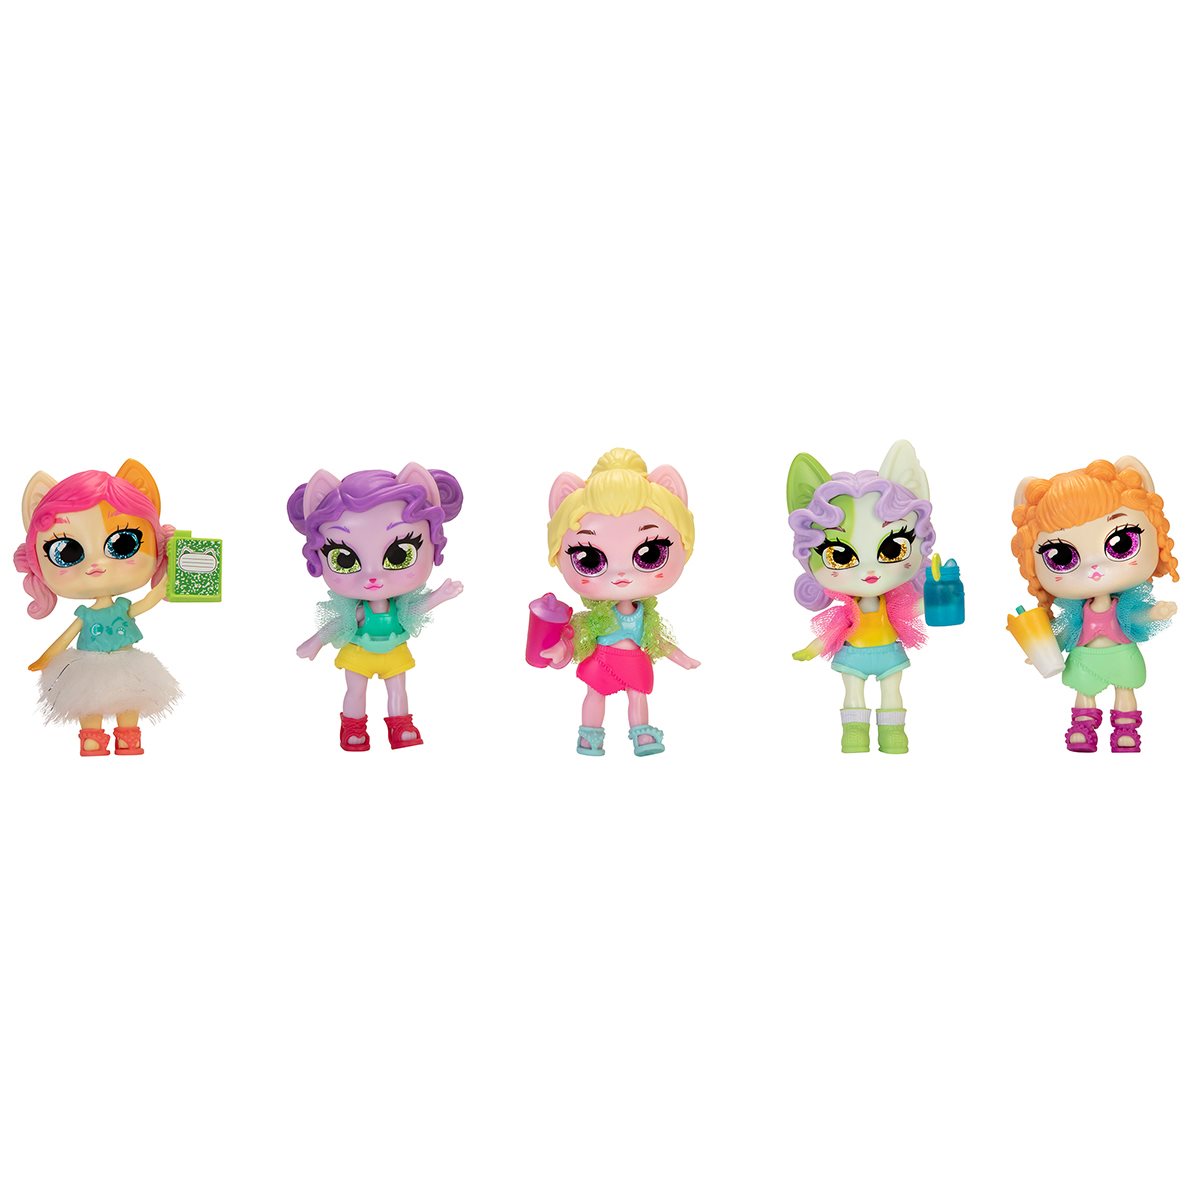 Purrista Girls Doll Figures Series #3-12 Different Purrista Girls to Collect New Series #3 Boba! 